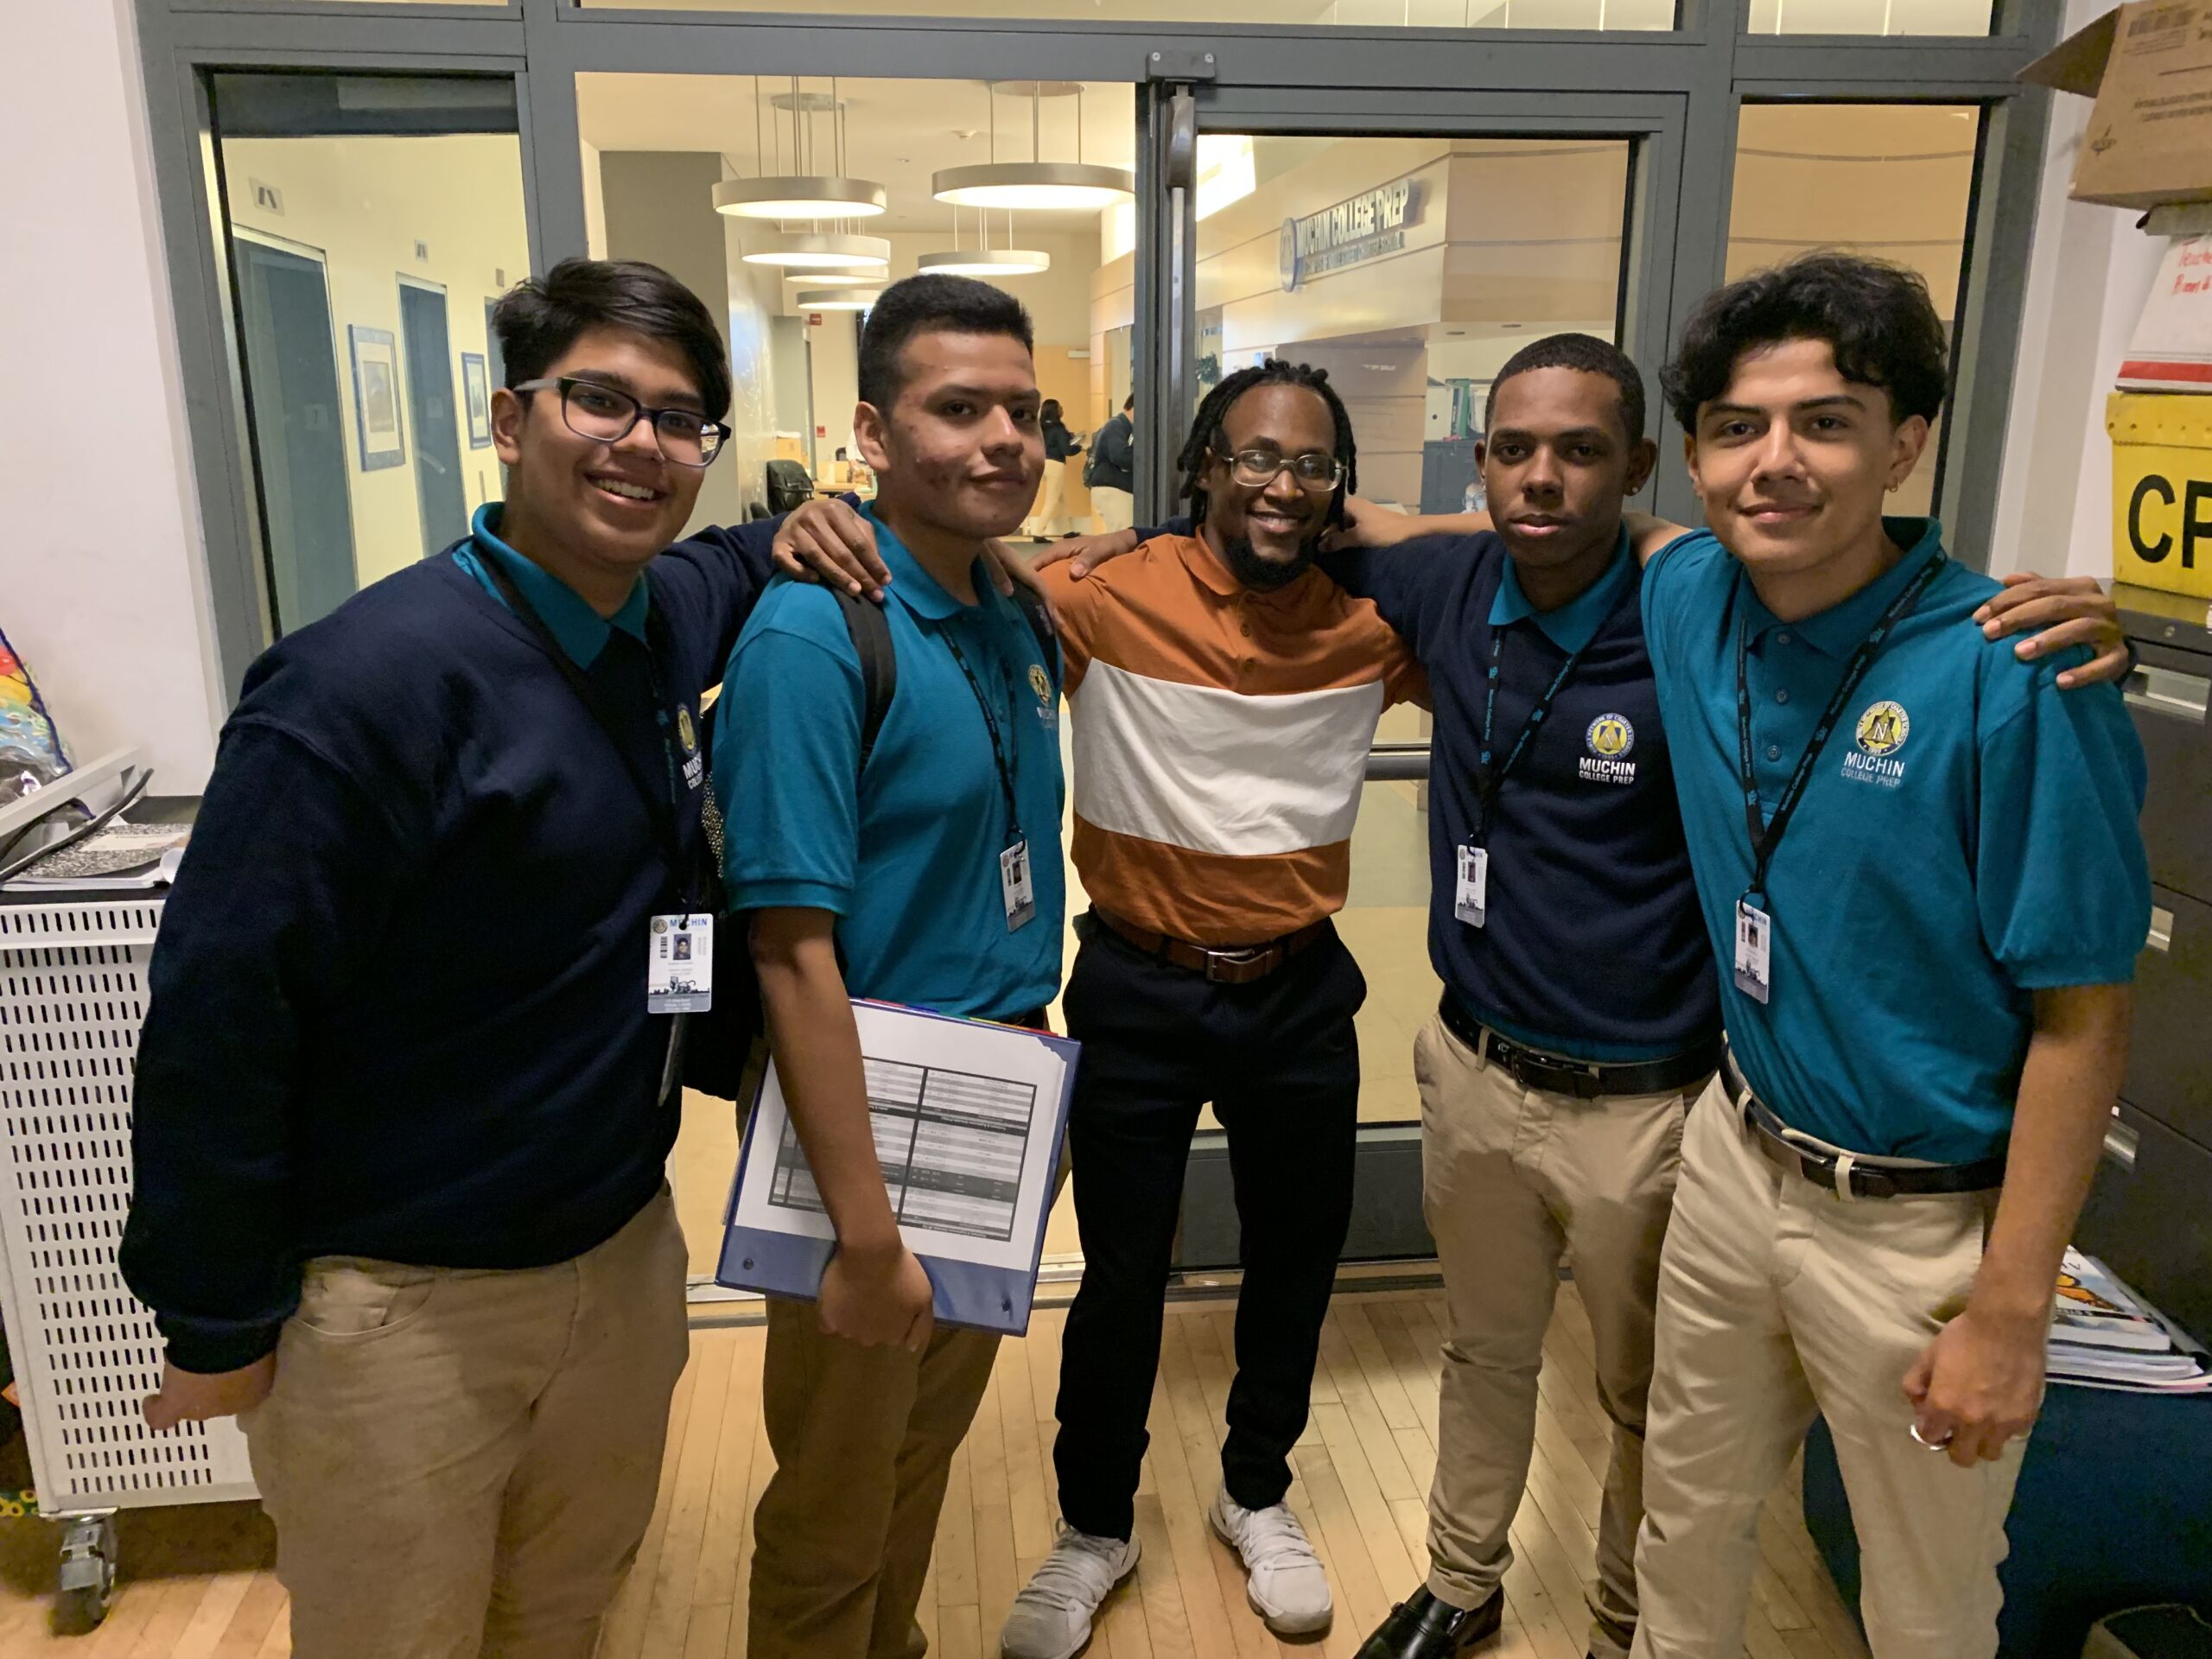 Emmanuel poses with his advisory class. There is two students posing next to him on the left and two students next to him on the right. The students are wearing the original Noble uniform with a navy blue sweater with khaki pants. Two students are wearing a teal button up school shirt. Emmanuel is wearing a half orange, half white stripped shirt.